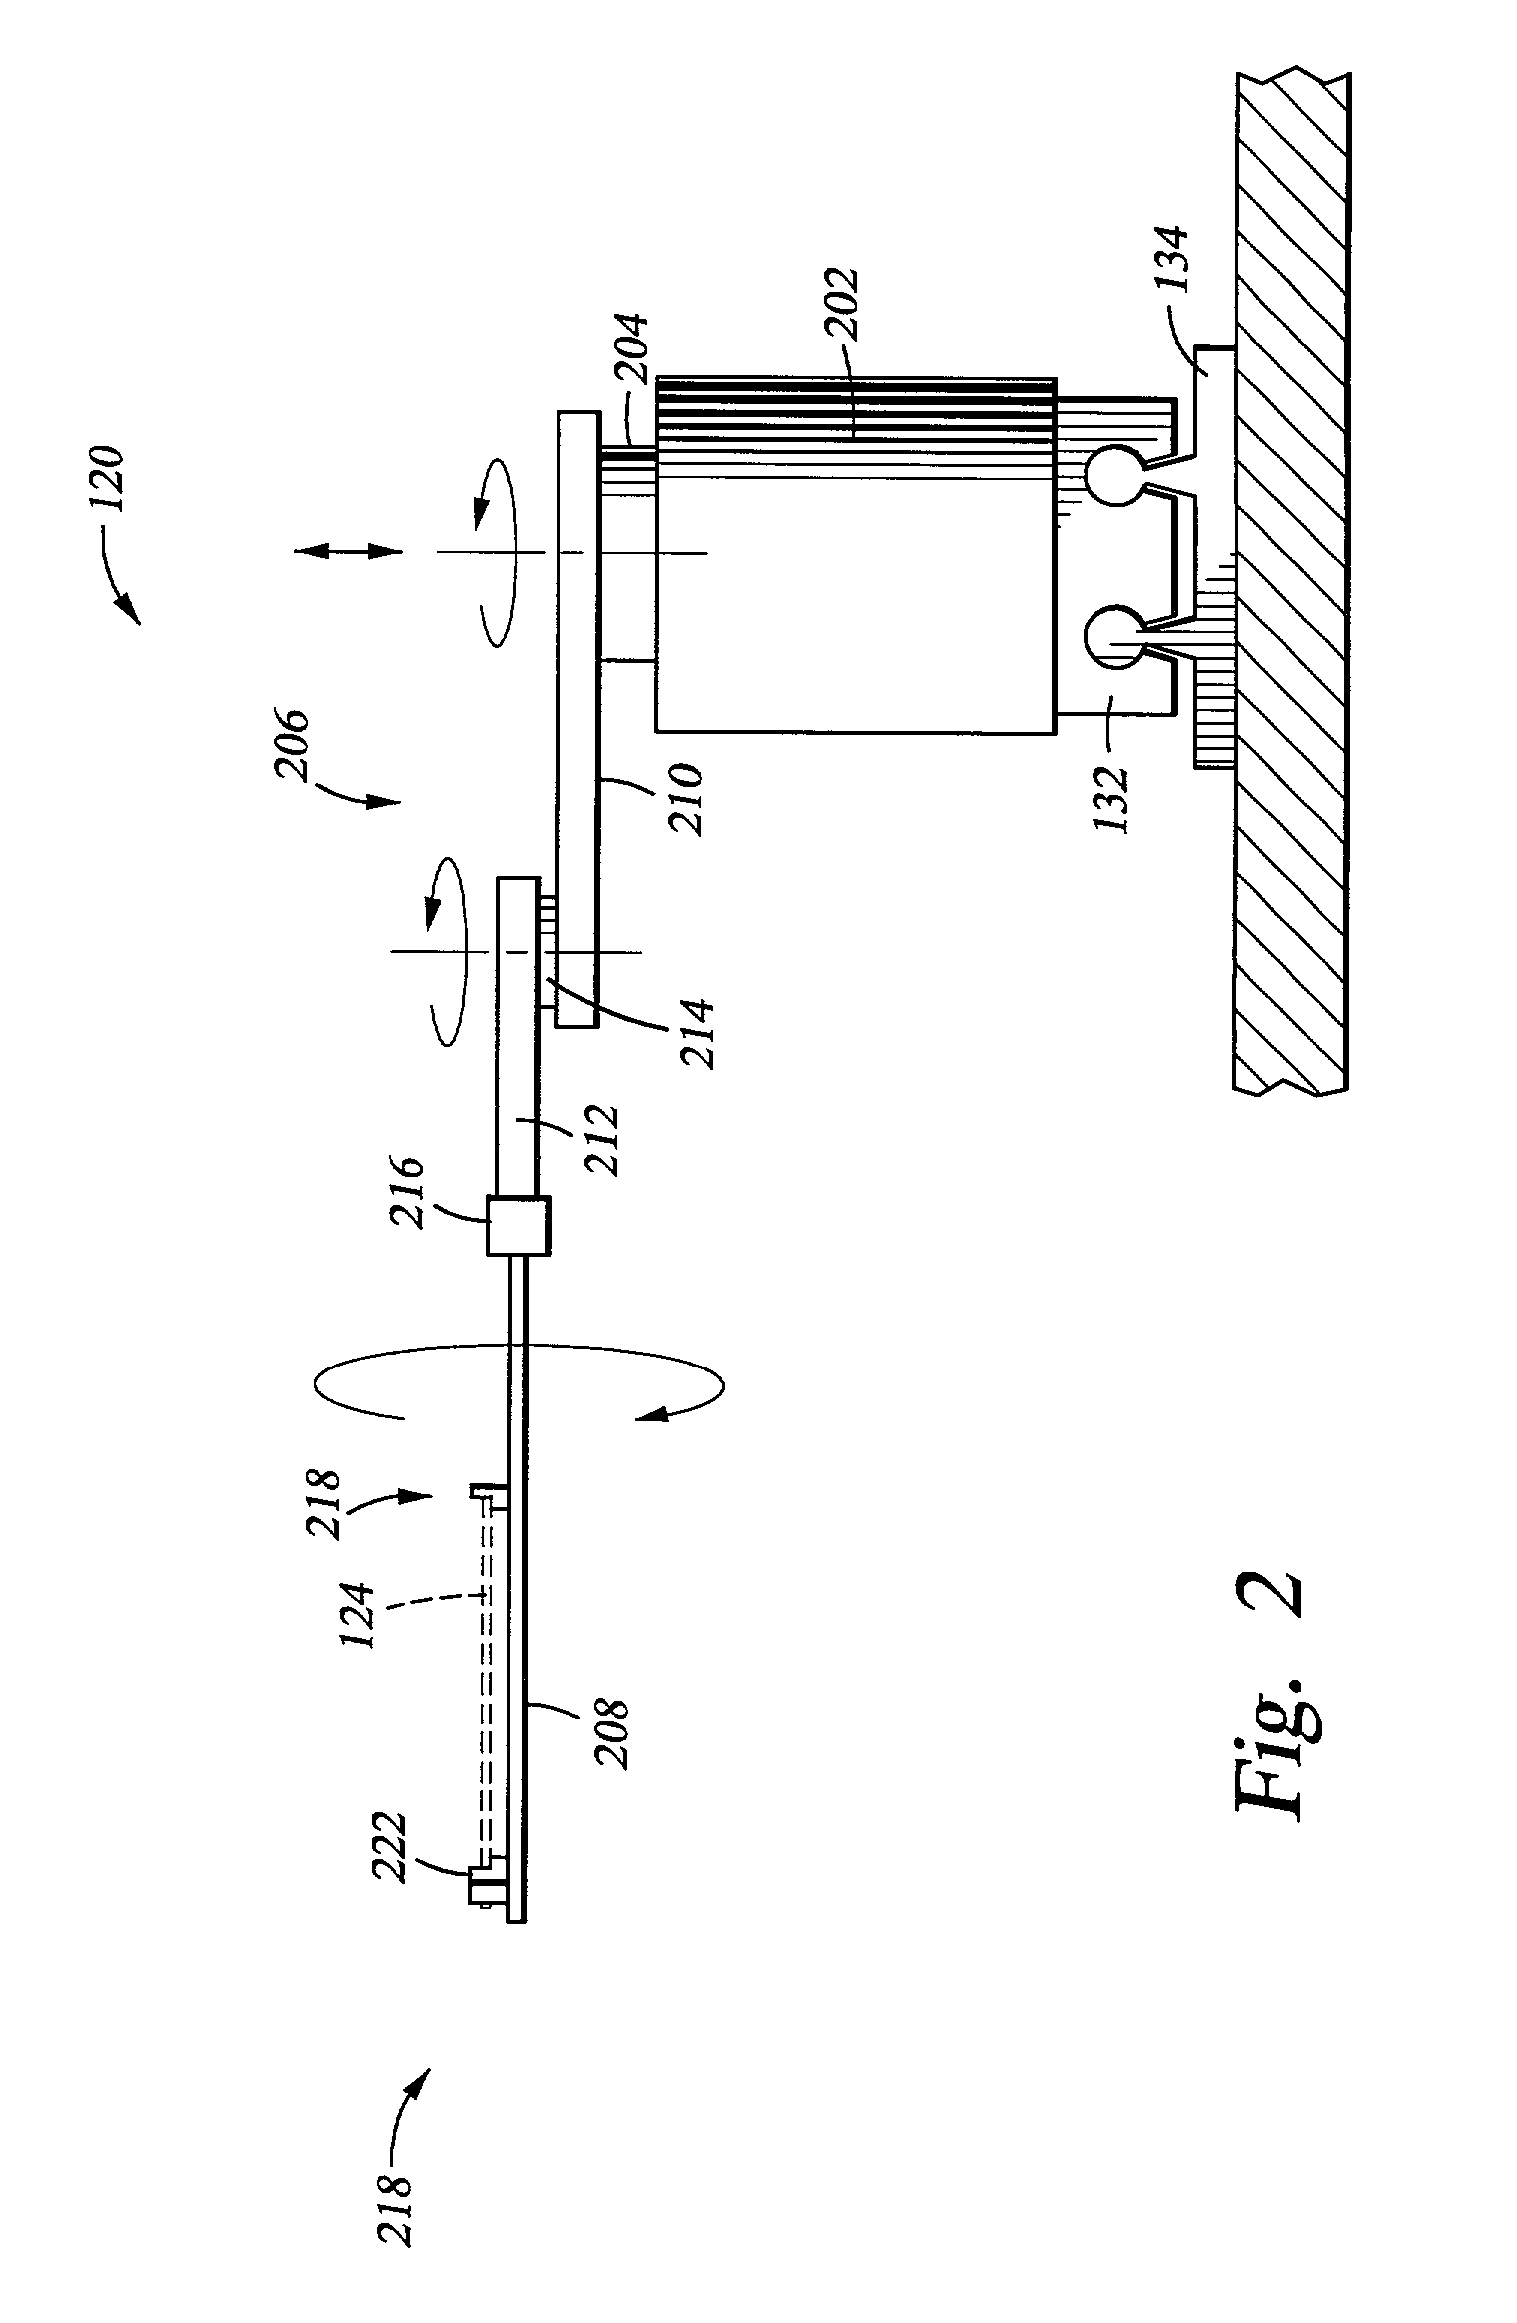 Method and apparatus for transferring a semiconductor substrate